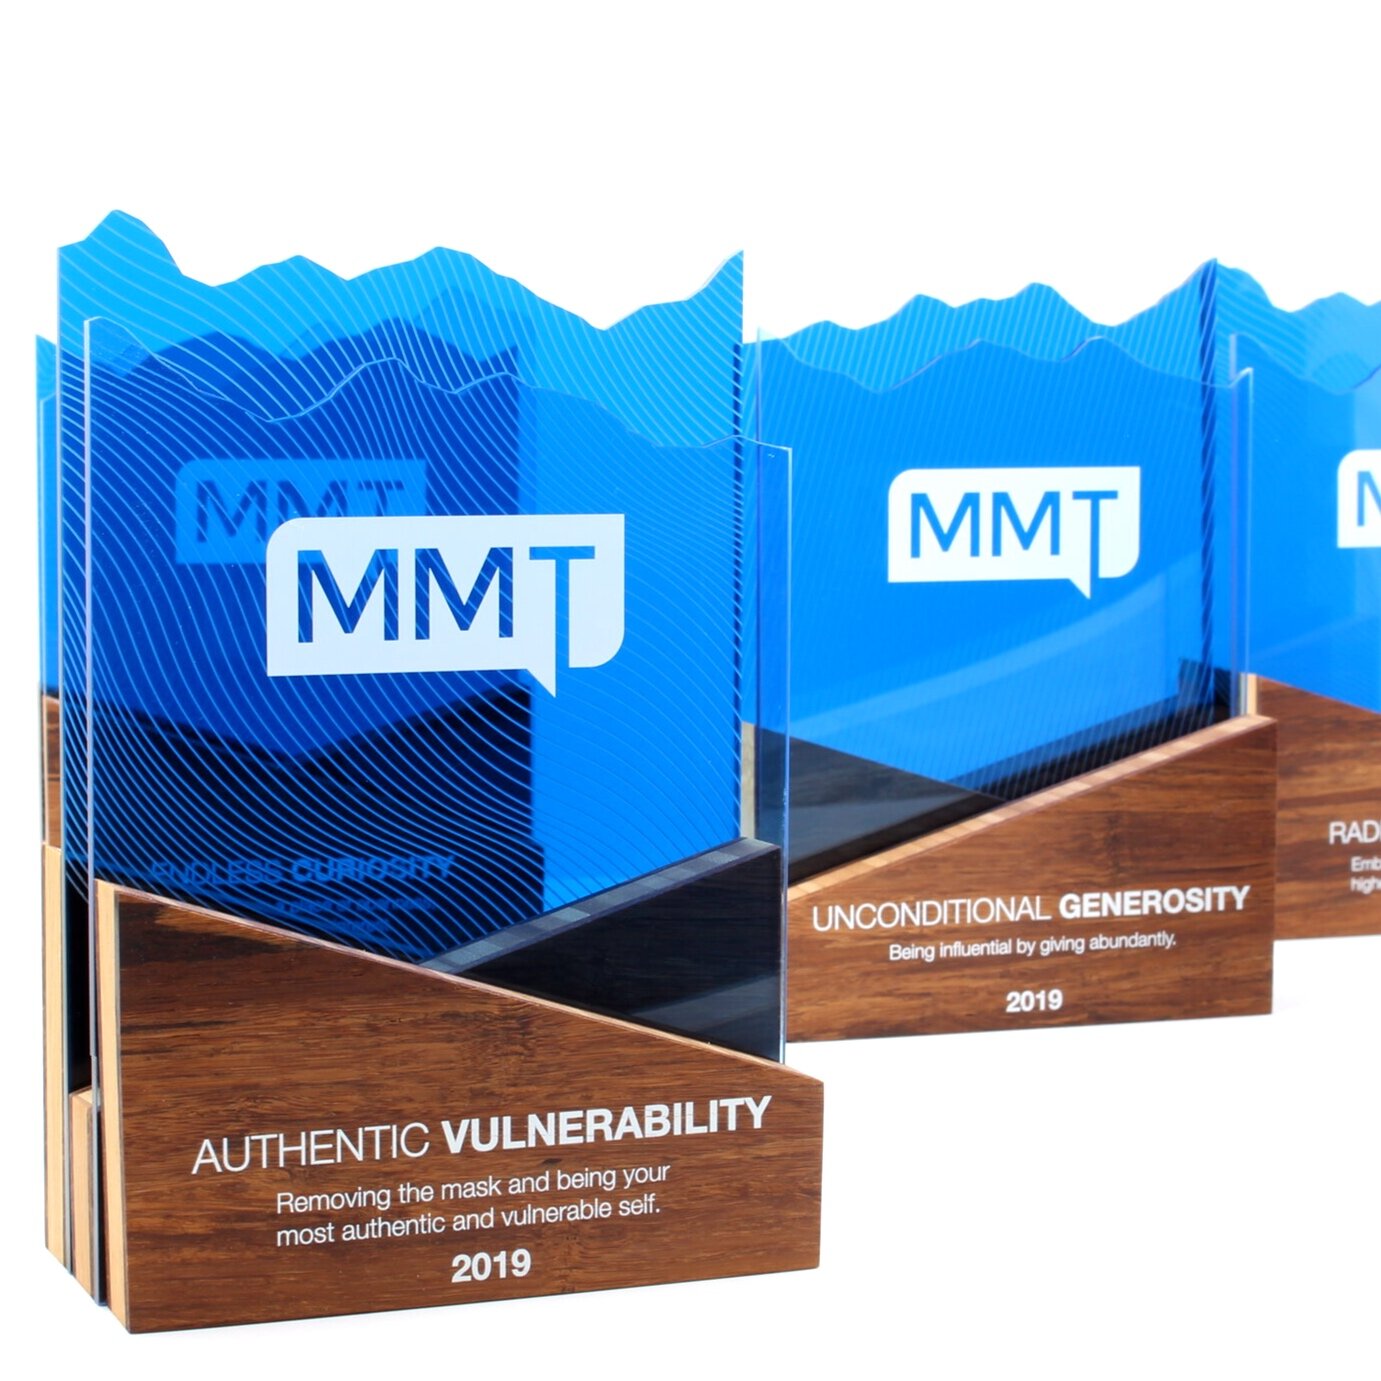 MMT+core+values+trophies+awards+yearly+staff+appreciation+5.jpg